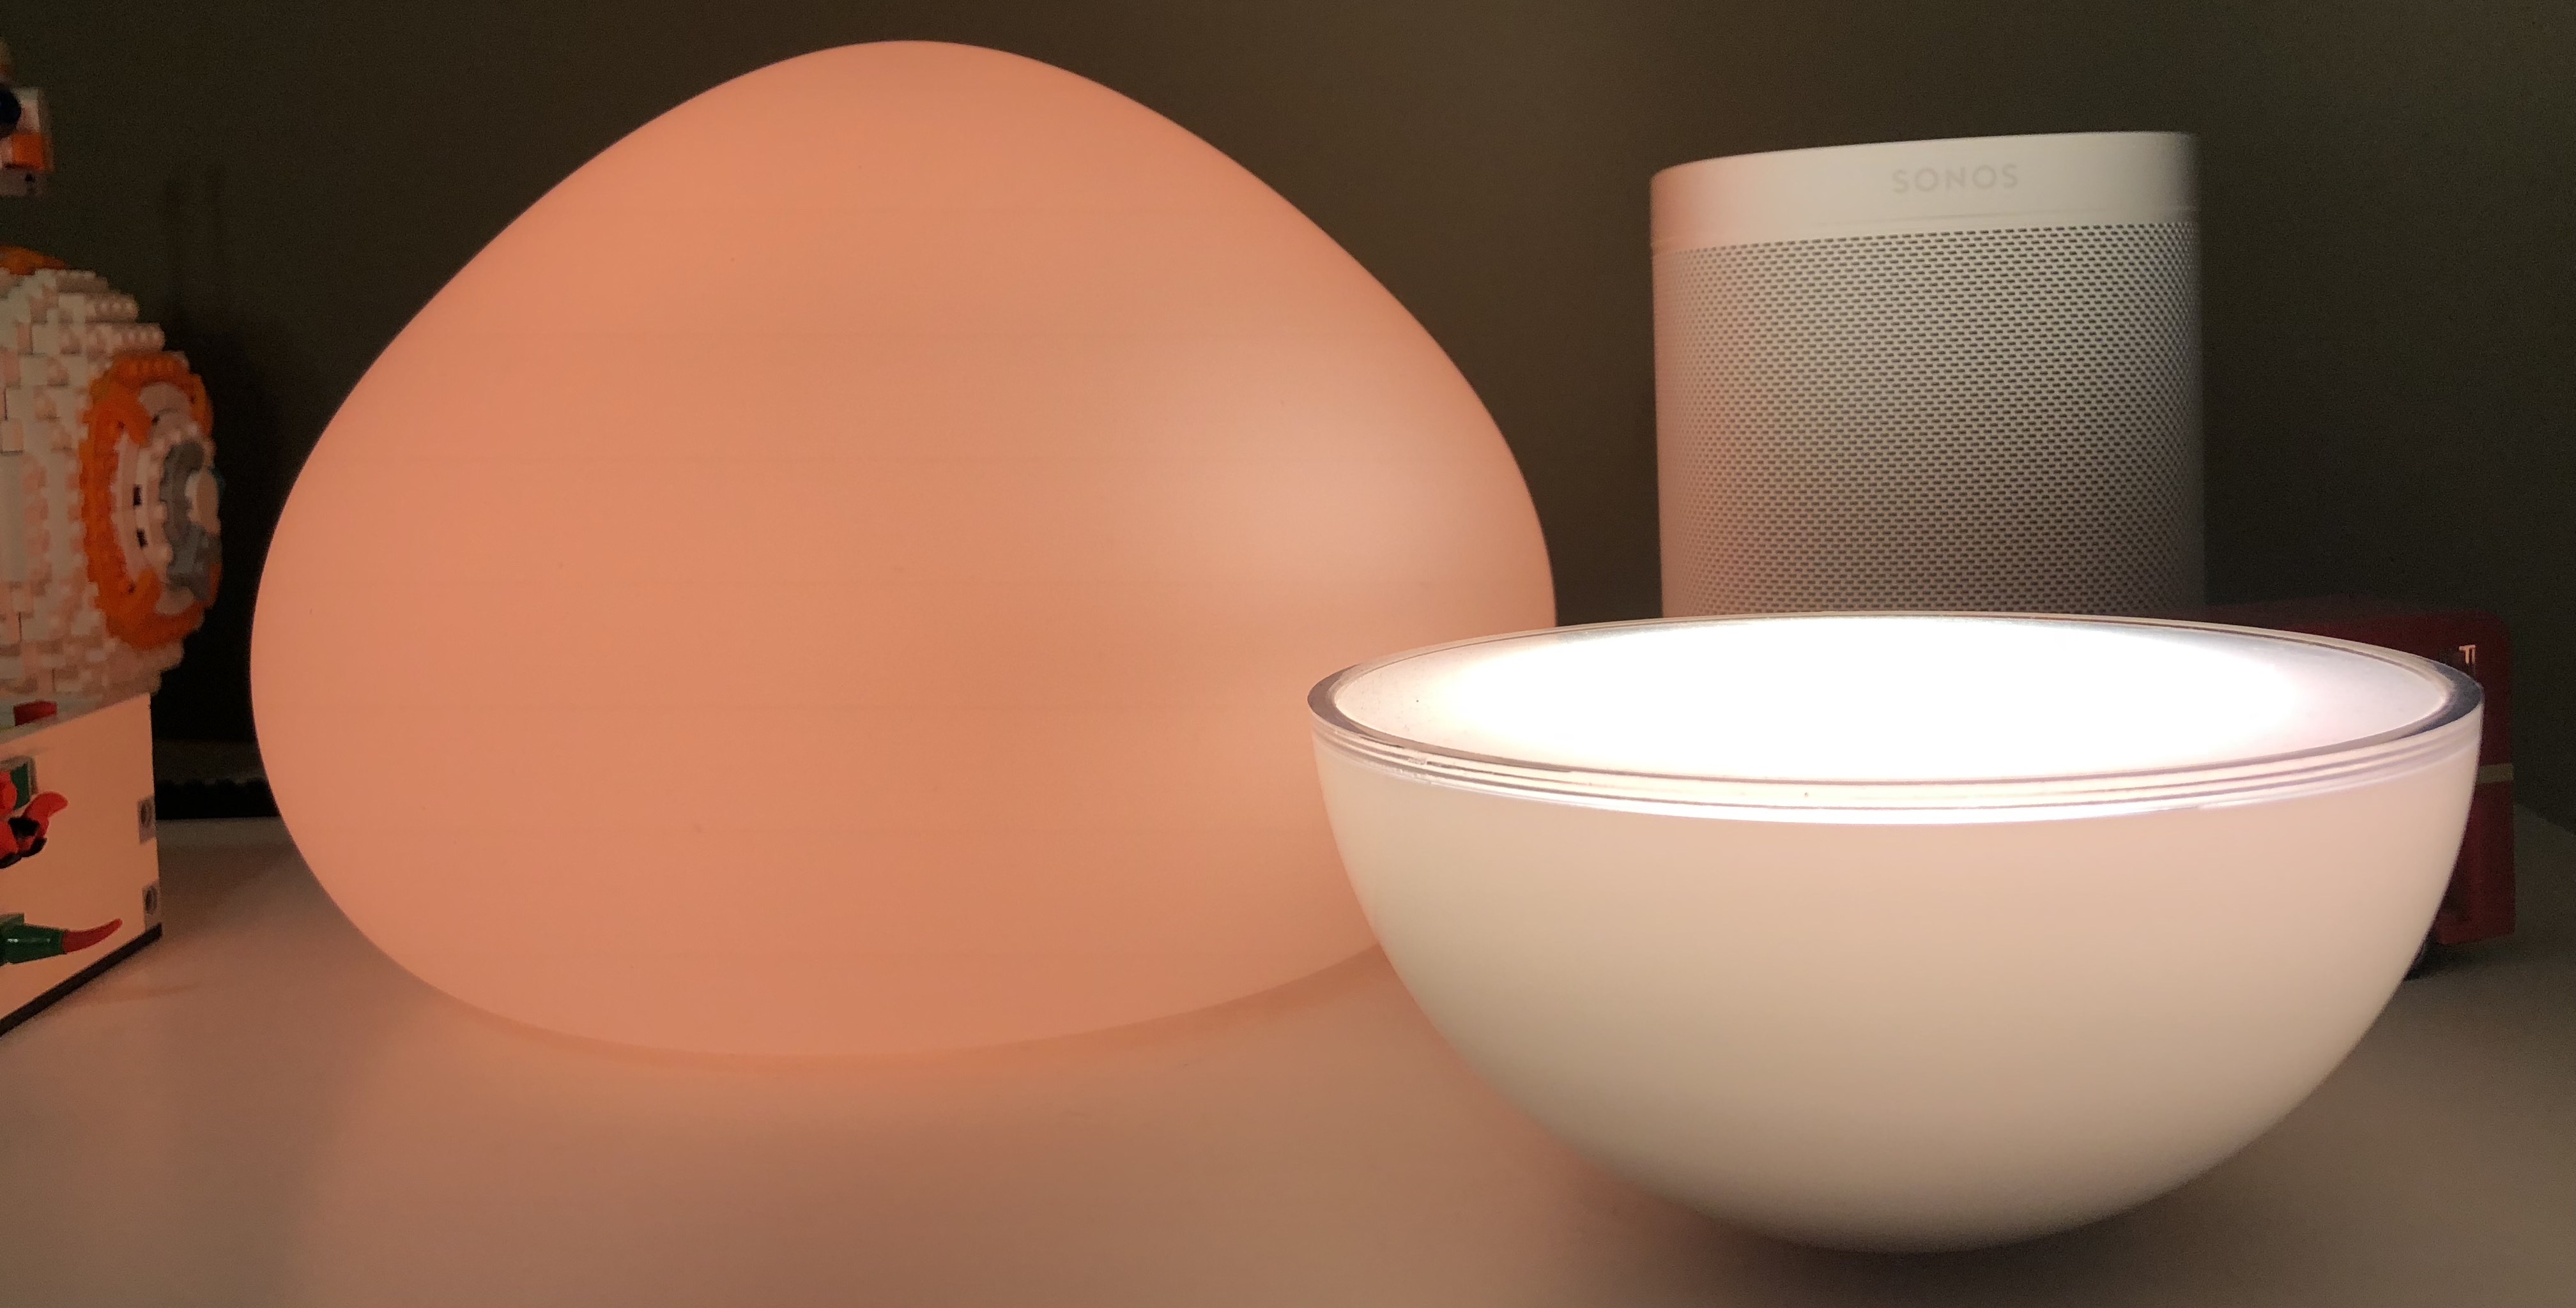 Review: Hue is a HomeKit table lamp with a design, color costs extra - 9to5Mac